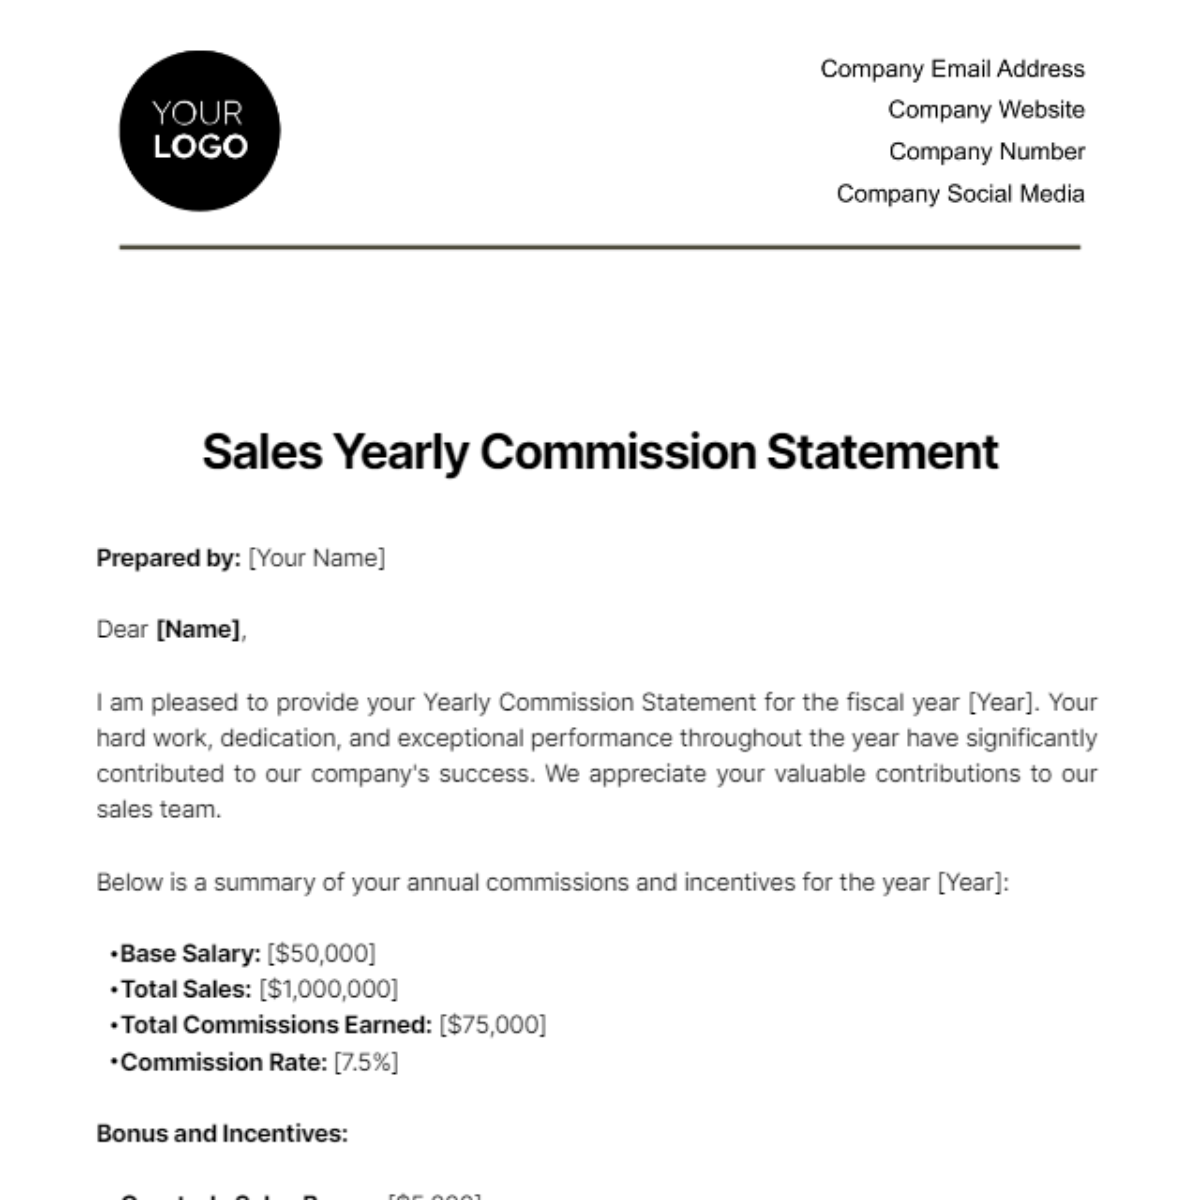 Sales Yearly Commission Statement Template